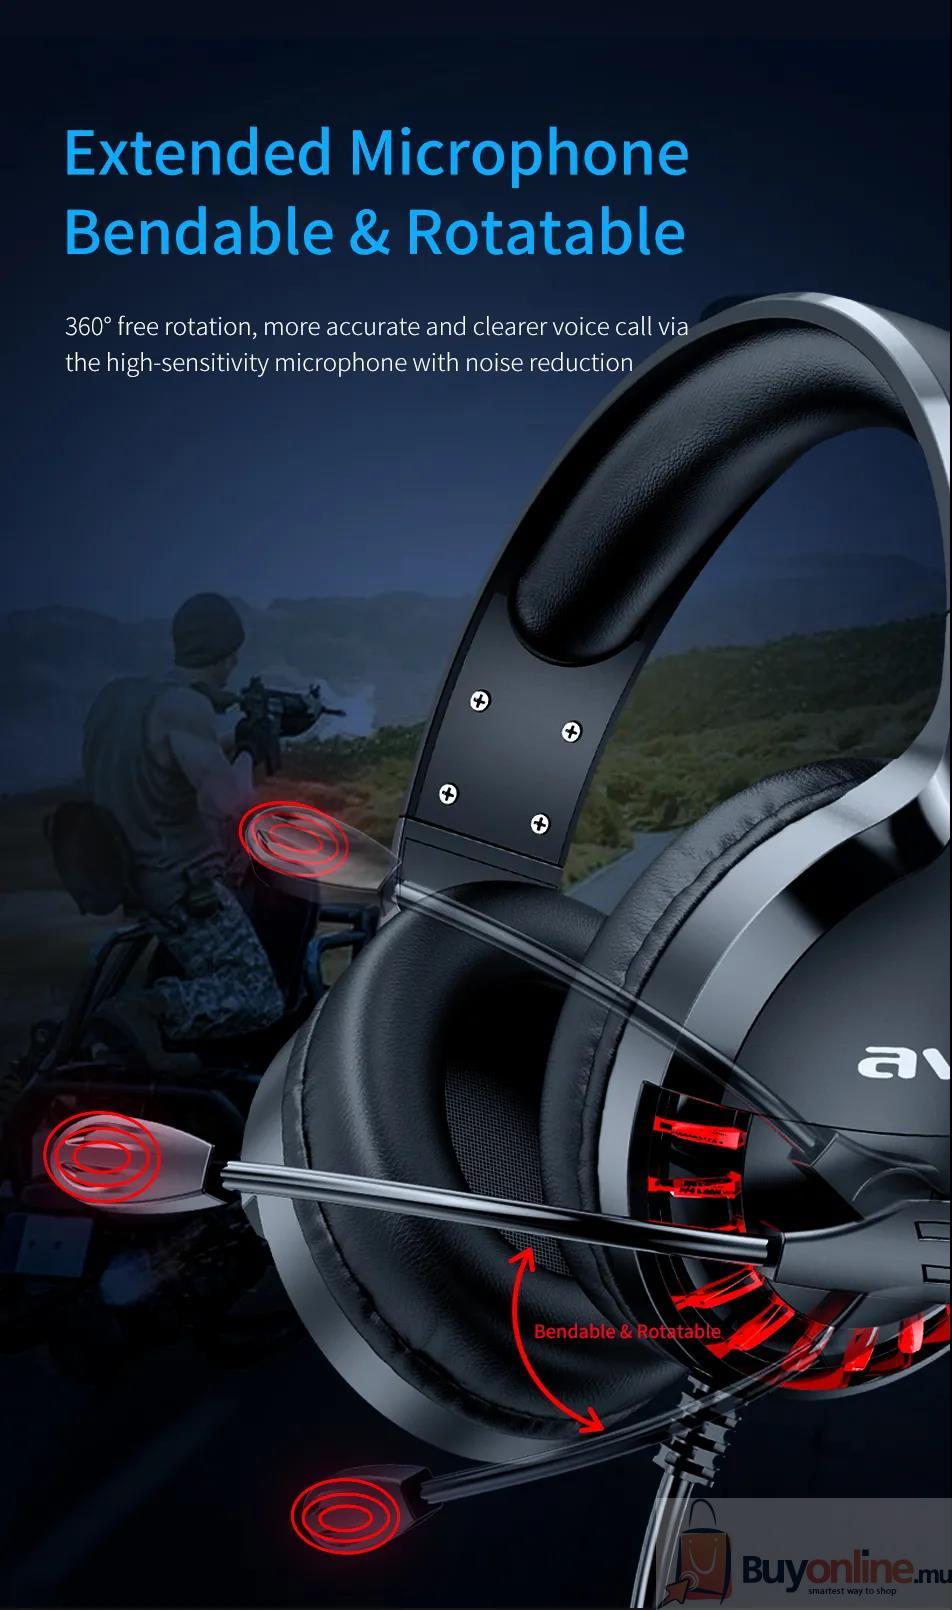 image 2022 01 24 001807 - AWEI ES-770i Wired Professional Led Light Game Headphone With Microphone For PC Computer Game Stereo 7.1 Bass Sound 50mm Speaker - BuyOnline.mu - Gaming Headphone,Game Headphone,Gaming Headset